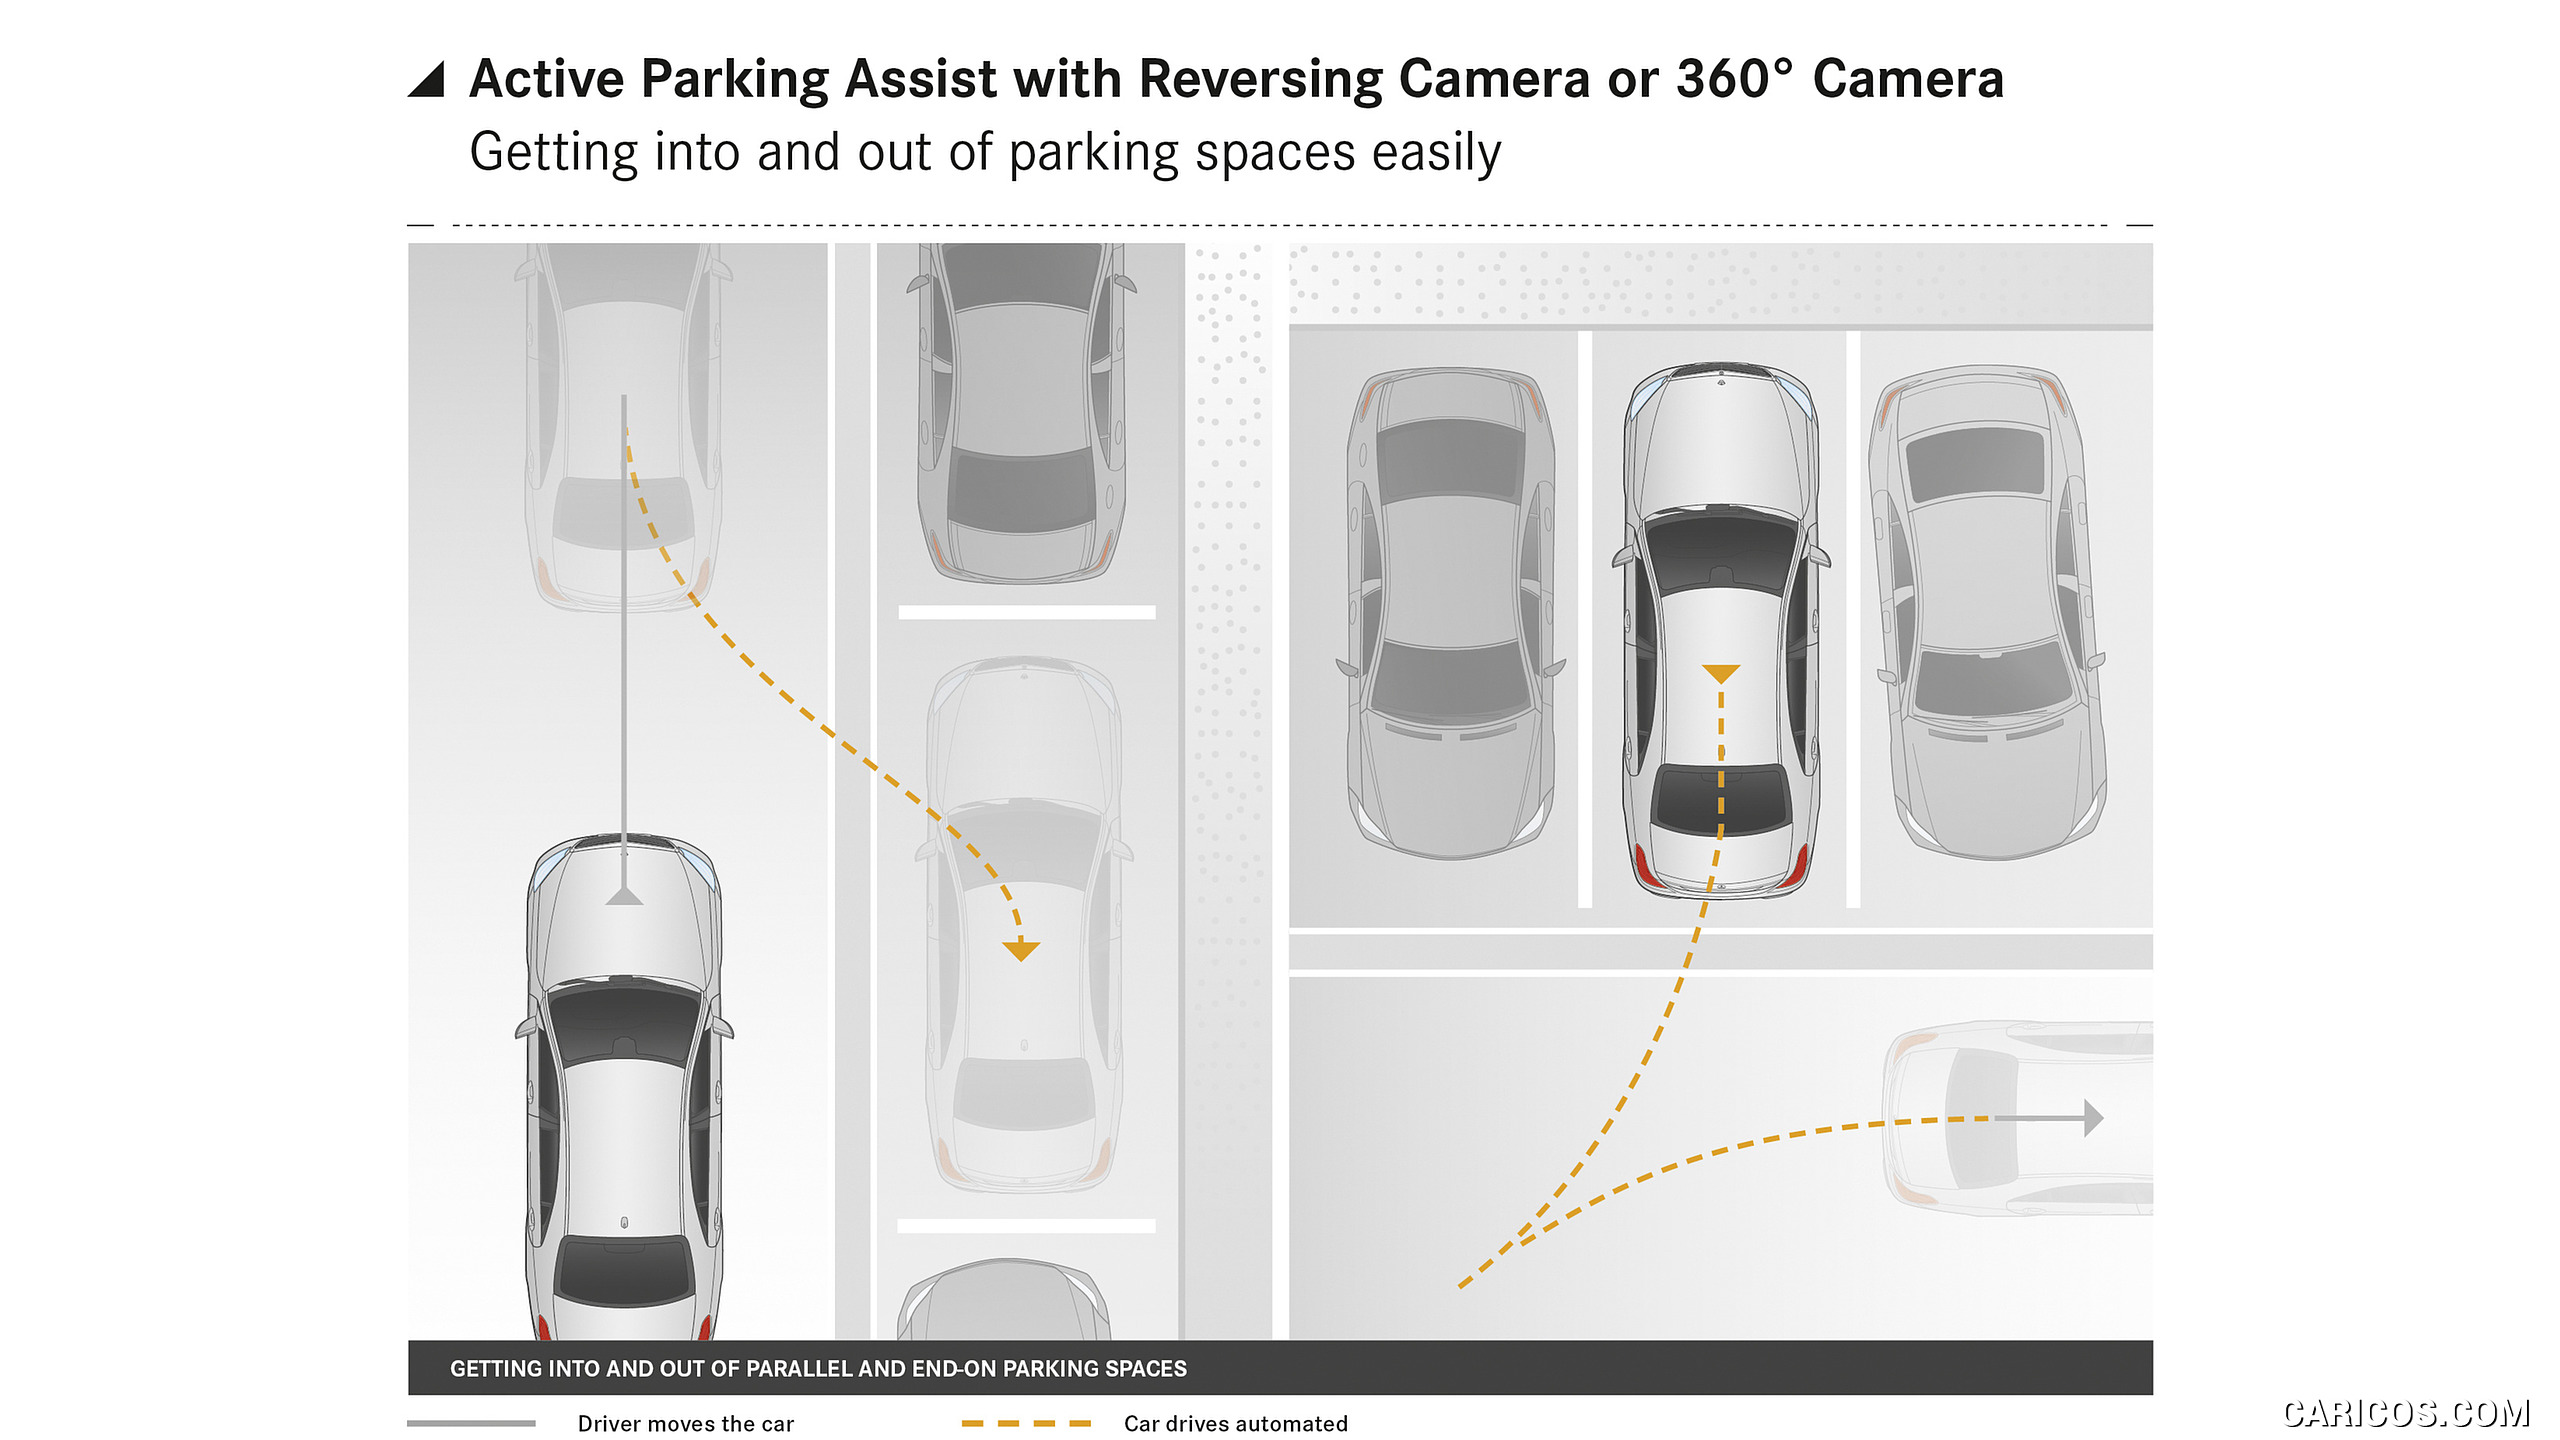 2018 Mercedes-Benz S-Class - Active Parking Assist with Reversing Camera or 360-degree Camera, #35 of 156